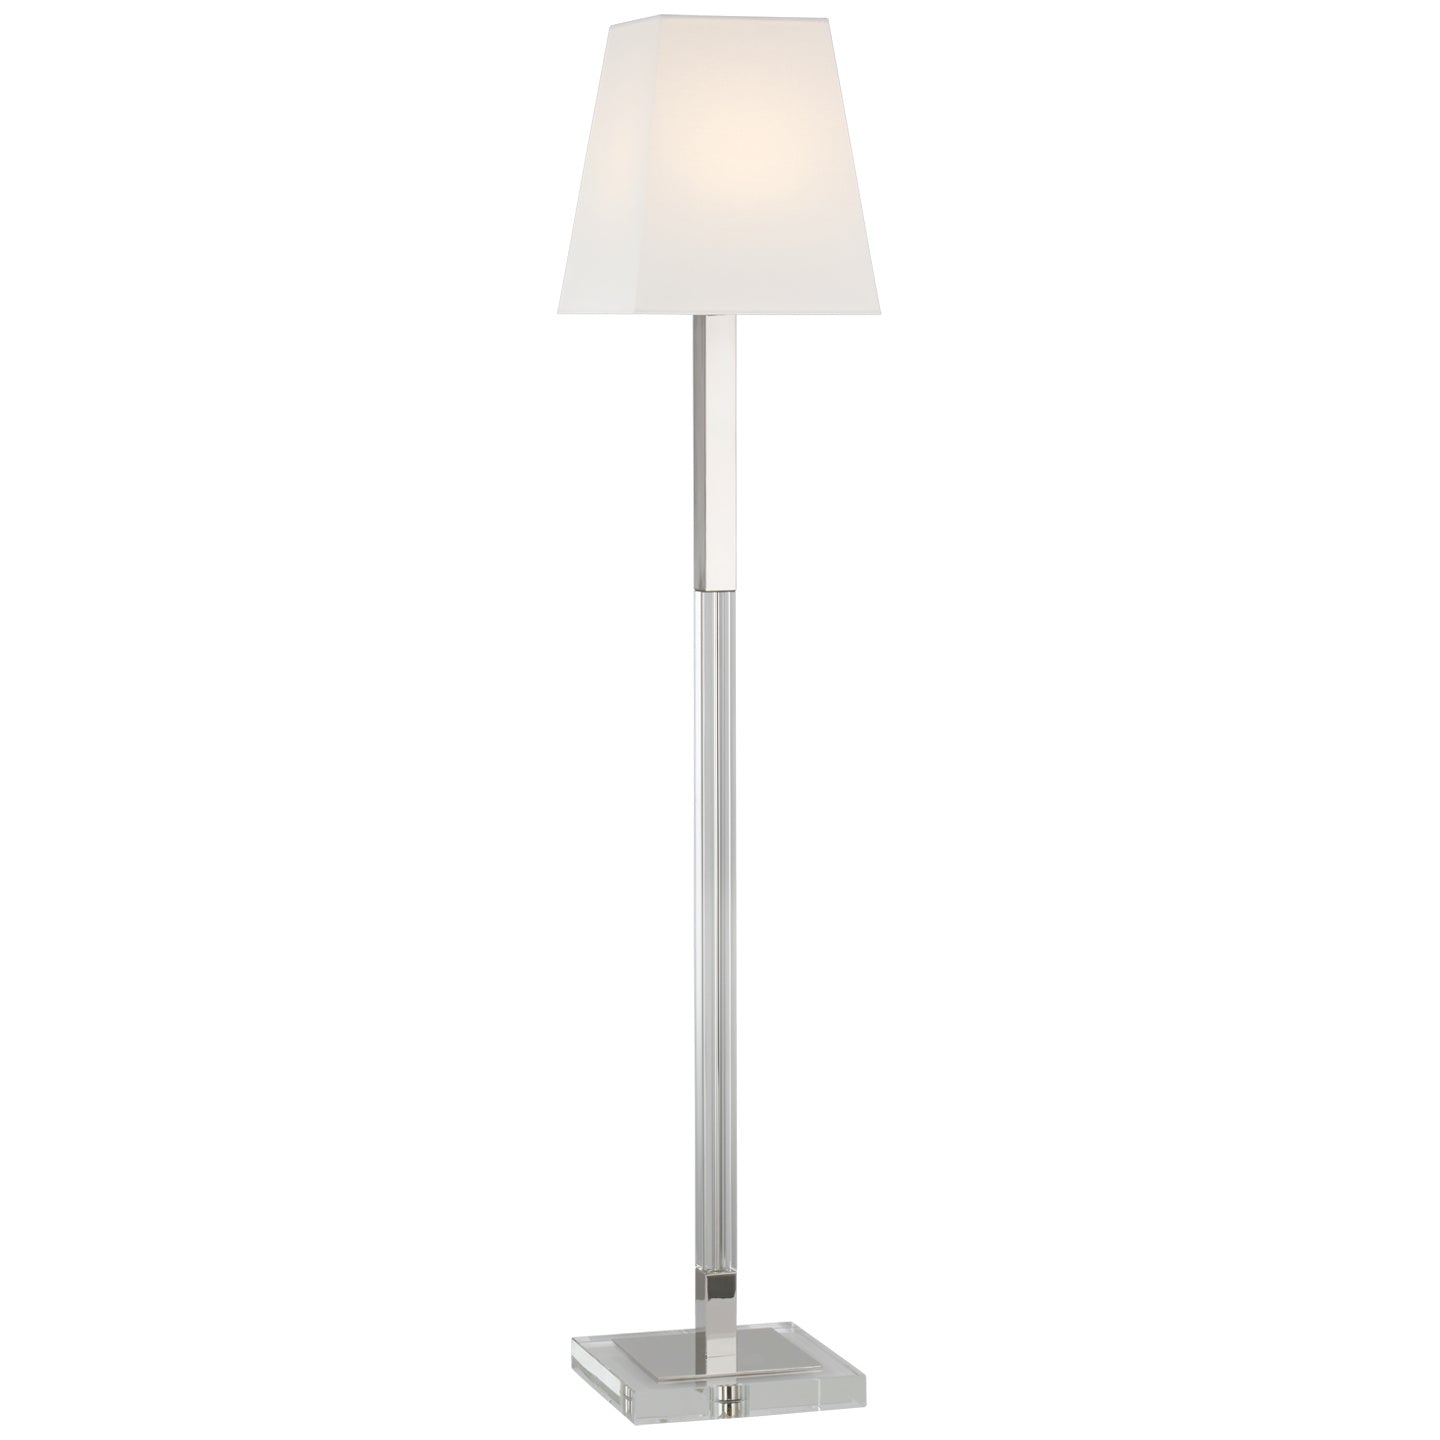 Load image into Gallery viewer, Visual Comfort Signature - CHA 9912PN/CG-L - LED Floor Lamp - Reagan - Polished Nickel and Crystal
